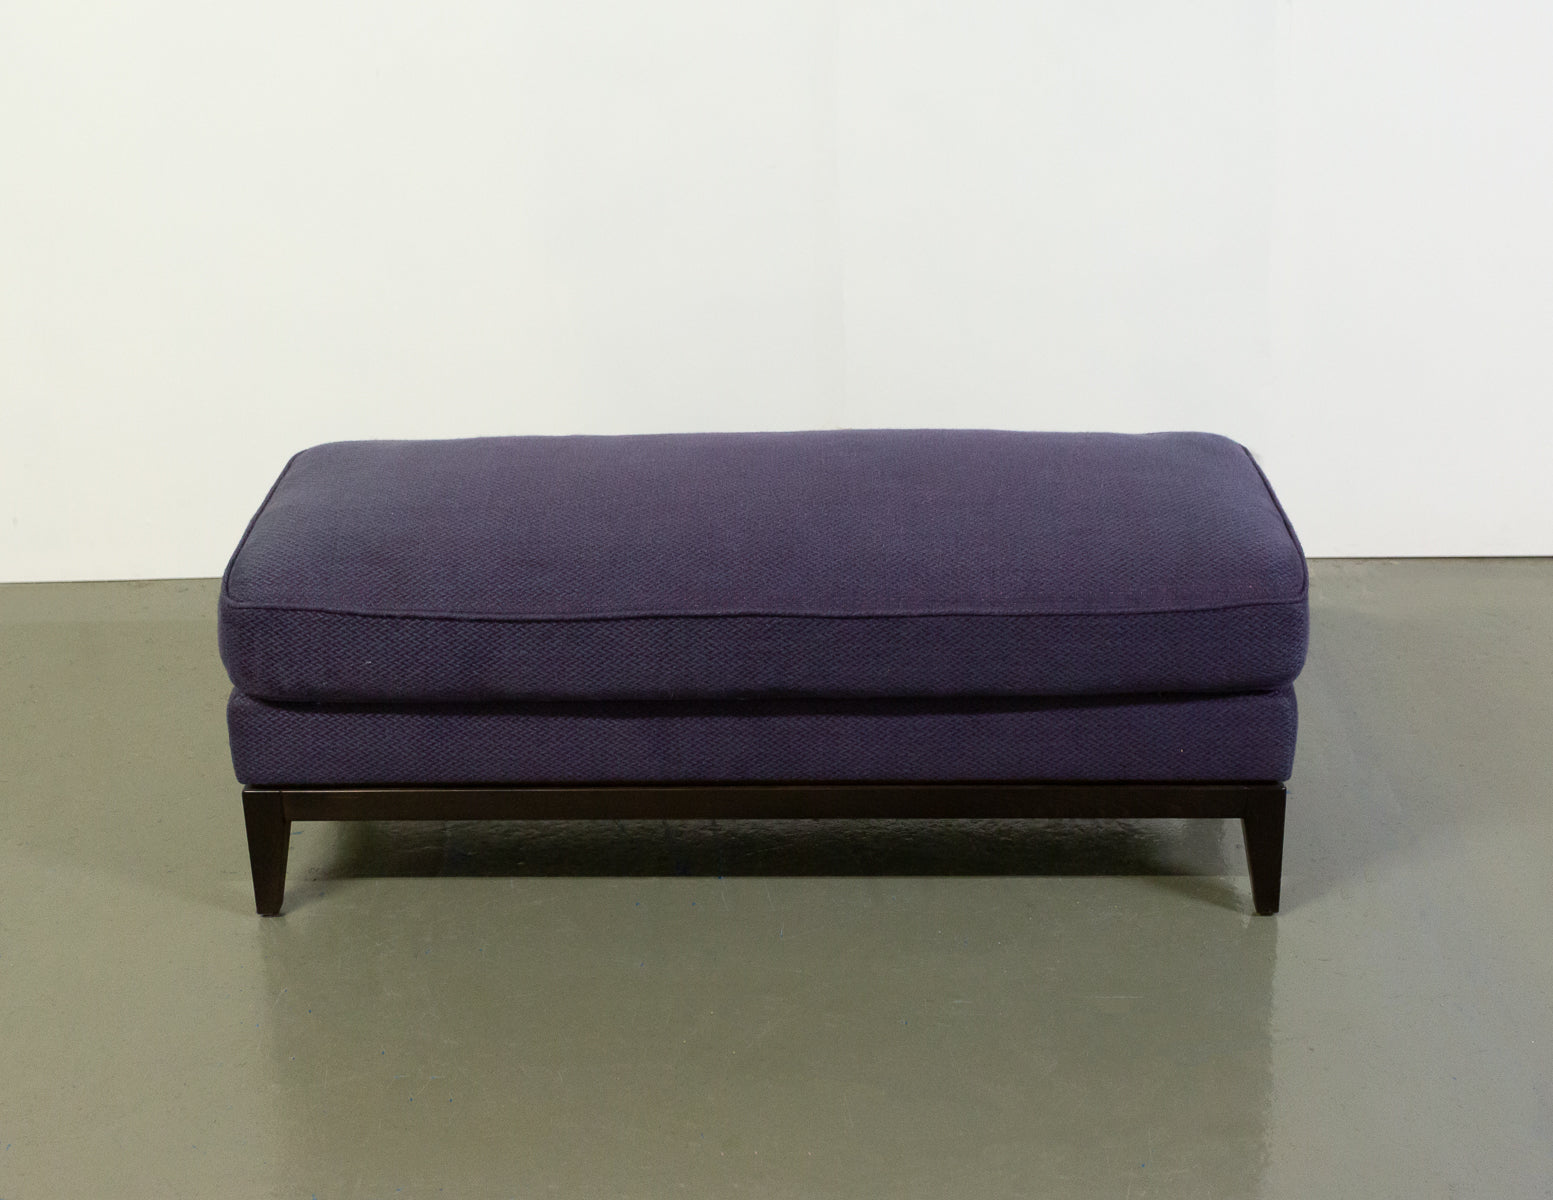 The Sofa & Chair Co 3 Seater Sofa with Footstool